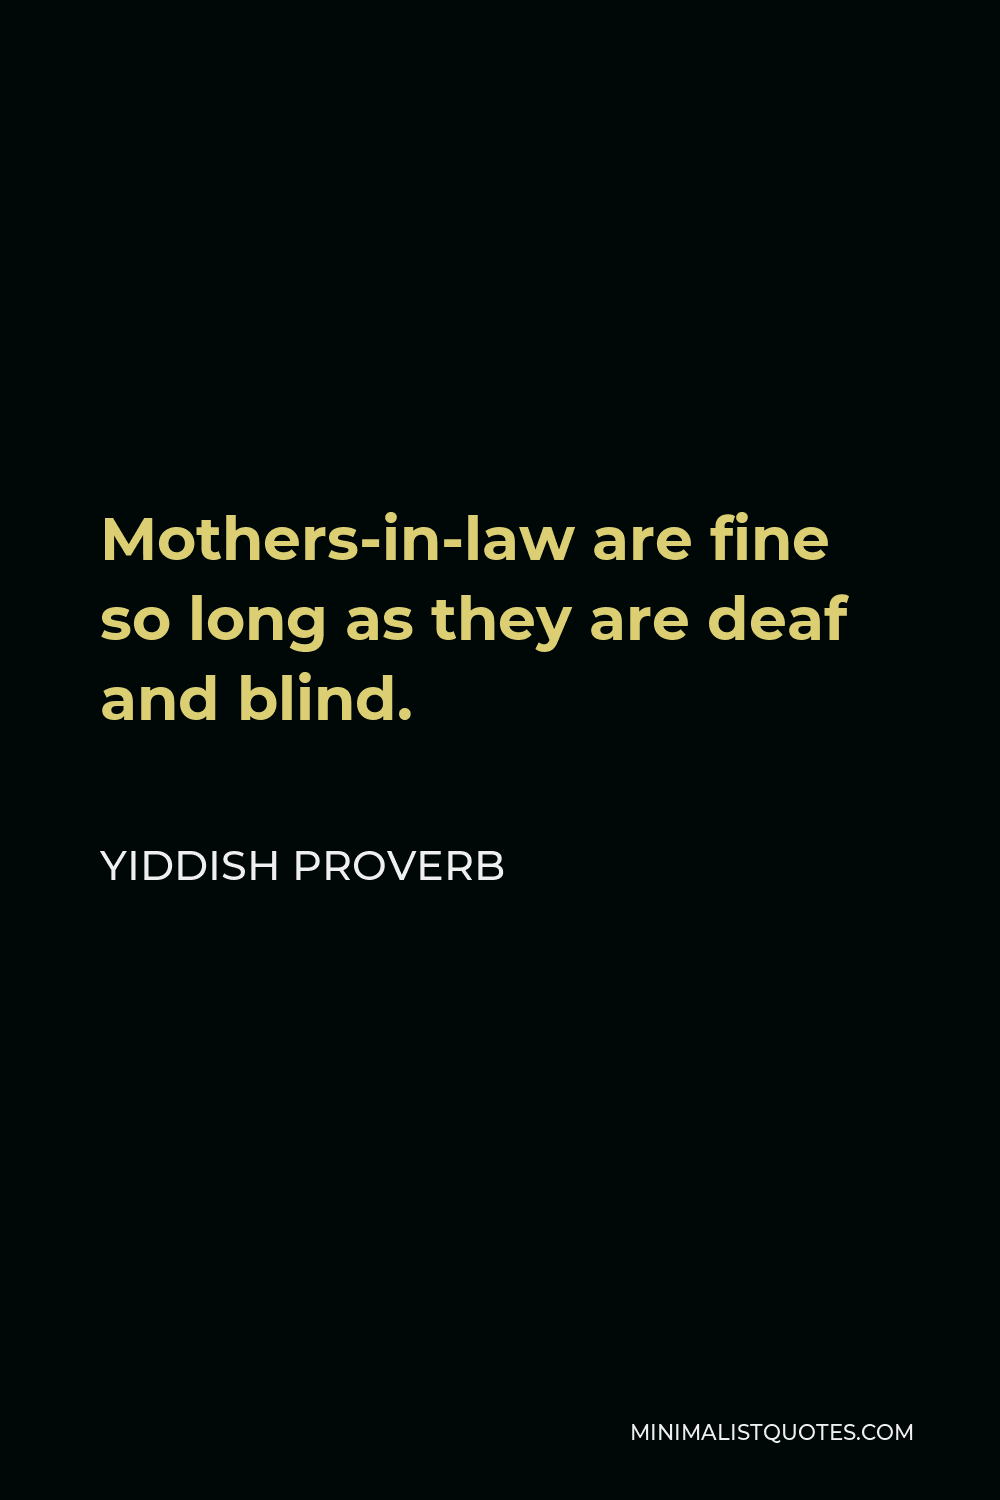 Yiddish Proverb Quote - Mothers-in-law are fine so long as they are deaf and blind.